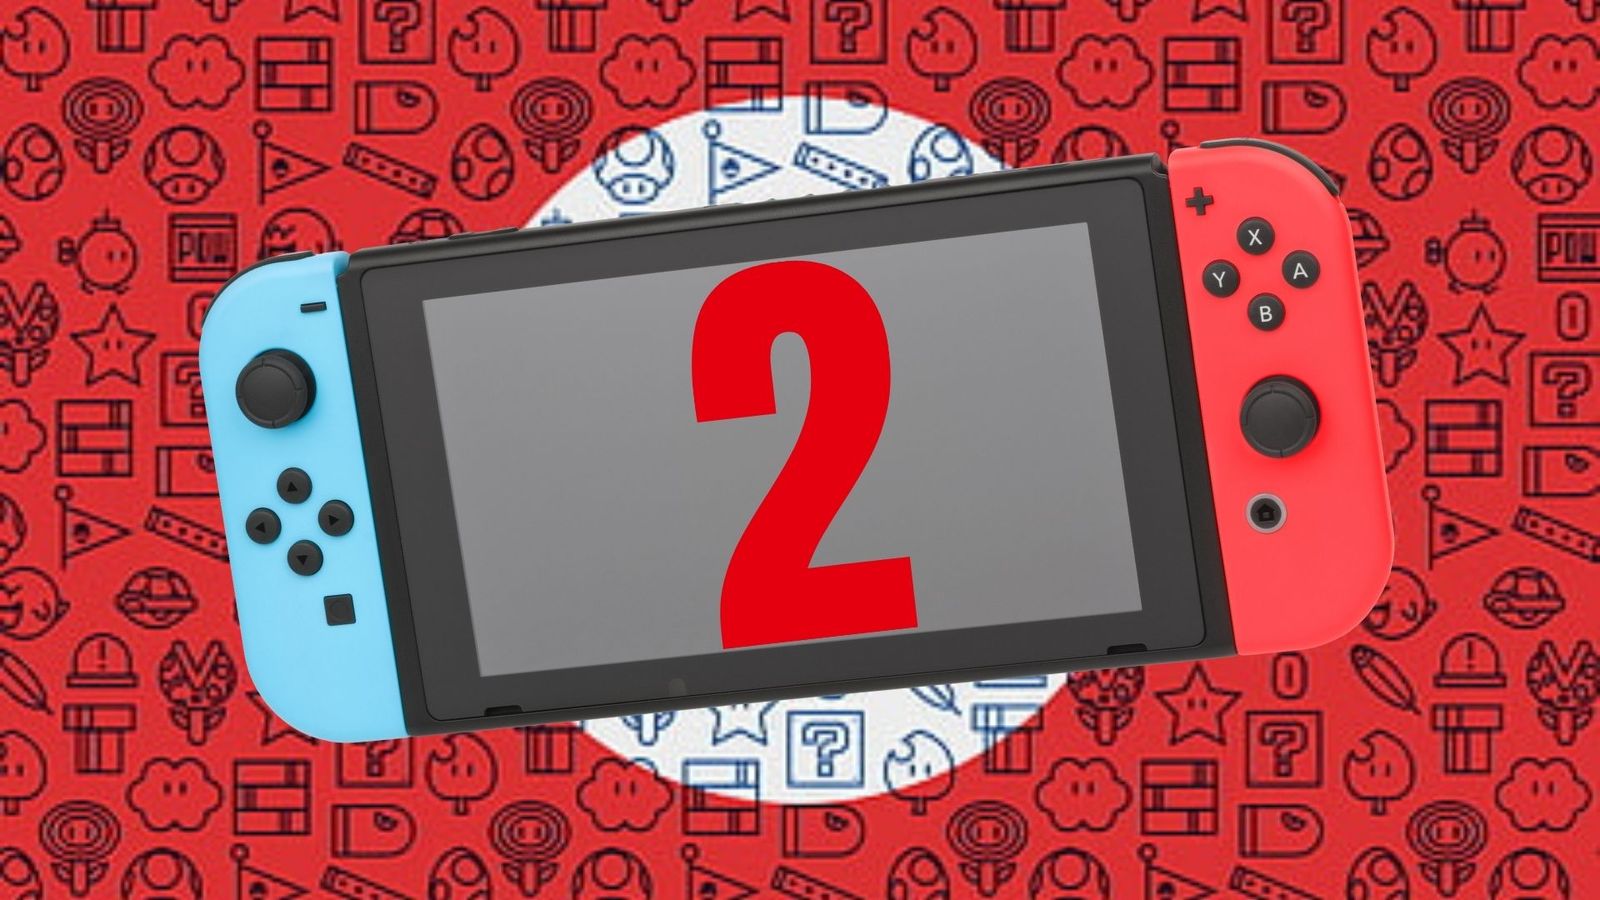 A Nintendo Switch on a red and white patterned background 